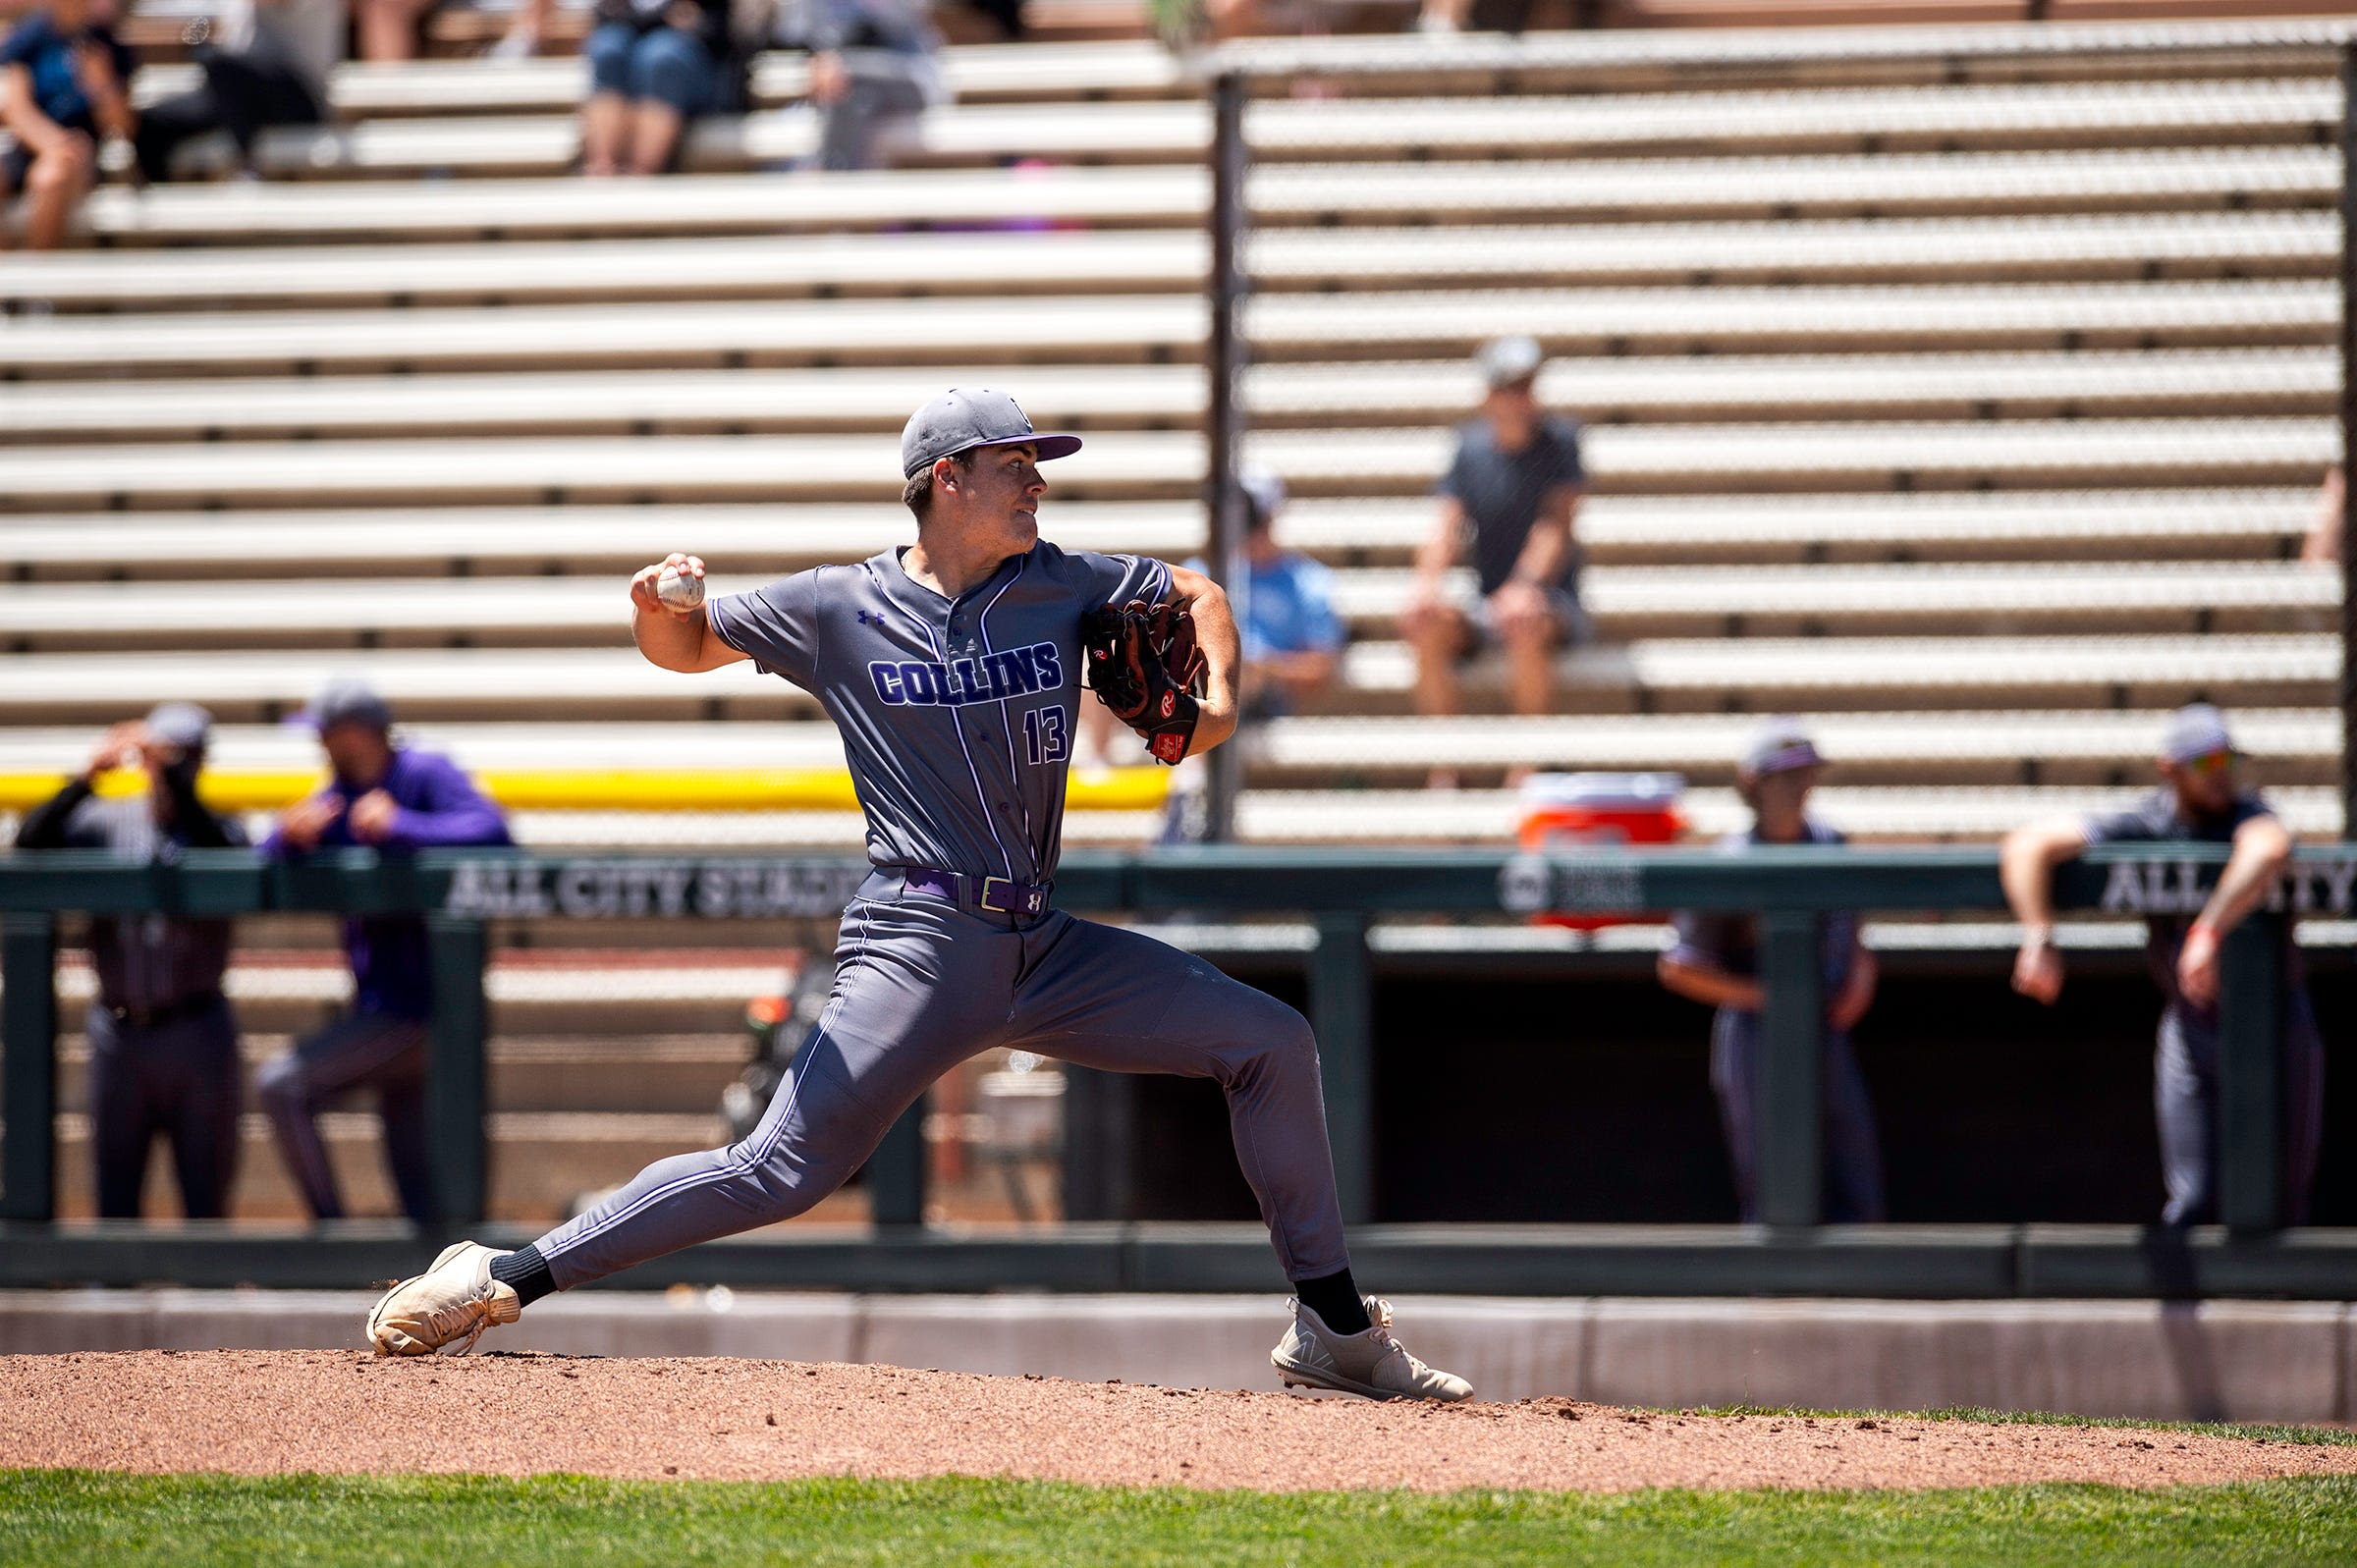 Colorado state baseball tournament: Windsor, Fort Collins face Saturday elimination games